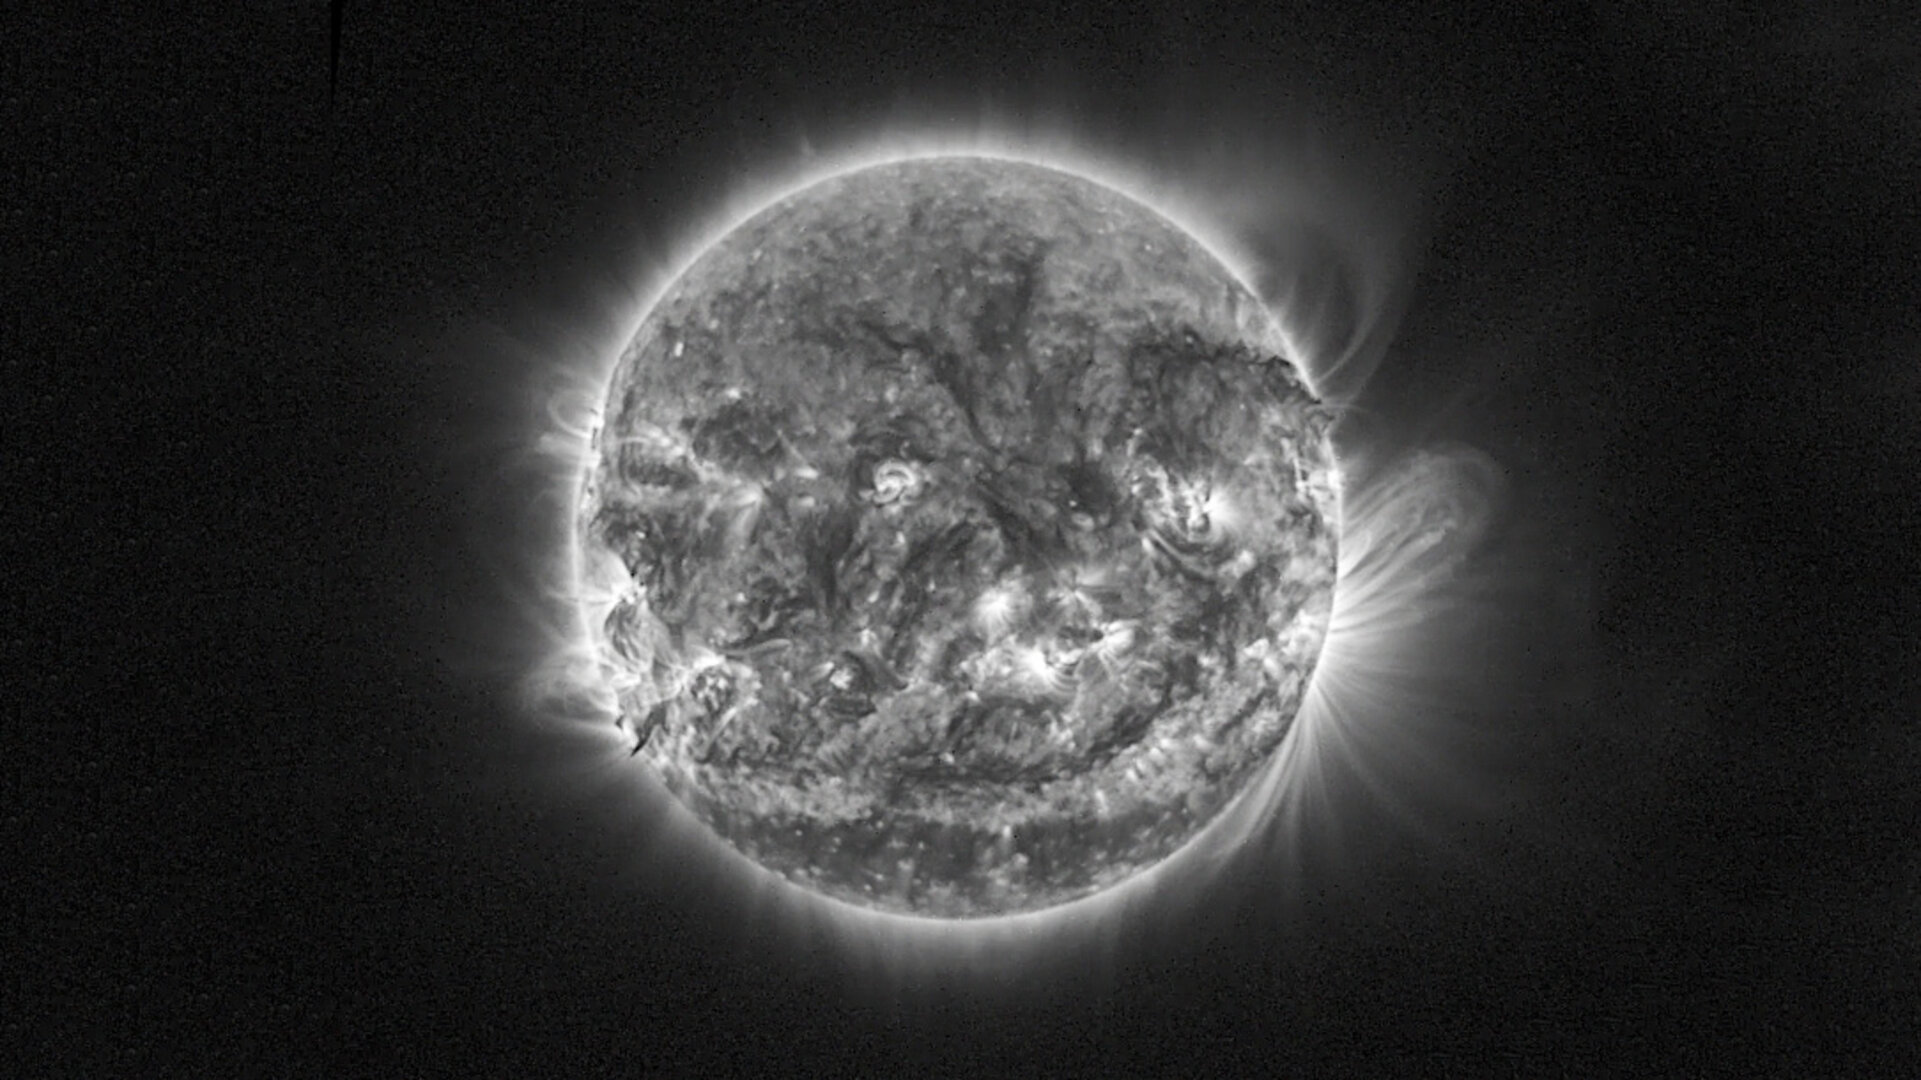 Proba-2 sees our Sun